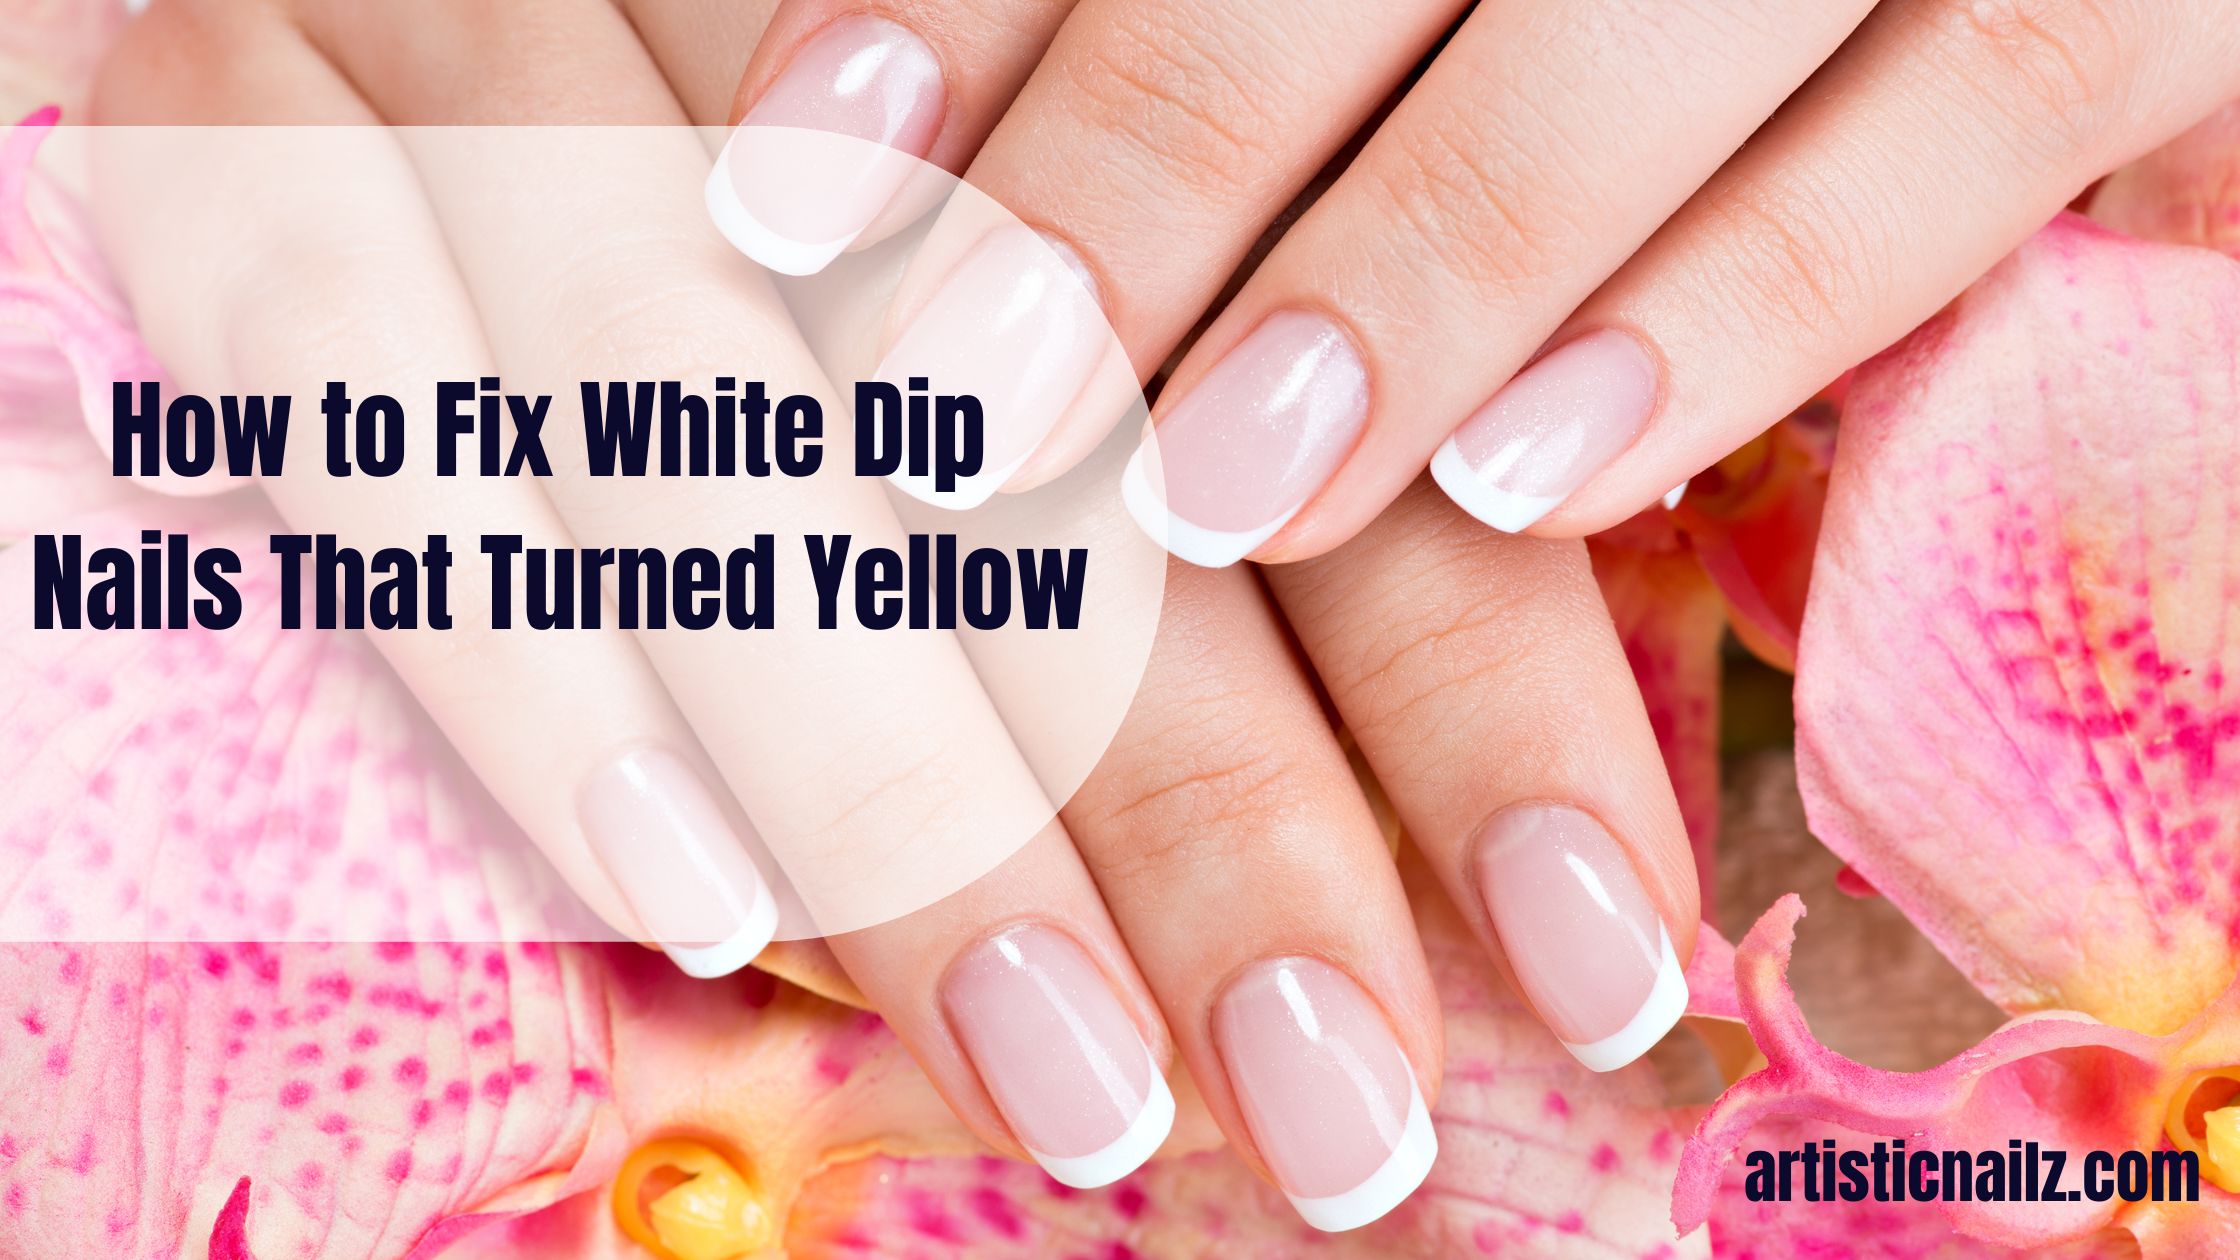 how to fix white dip nails that turned yellow